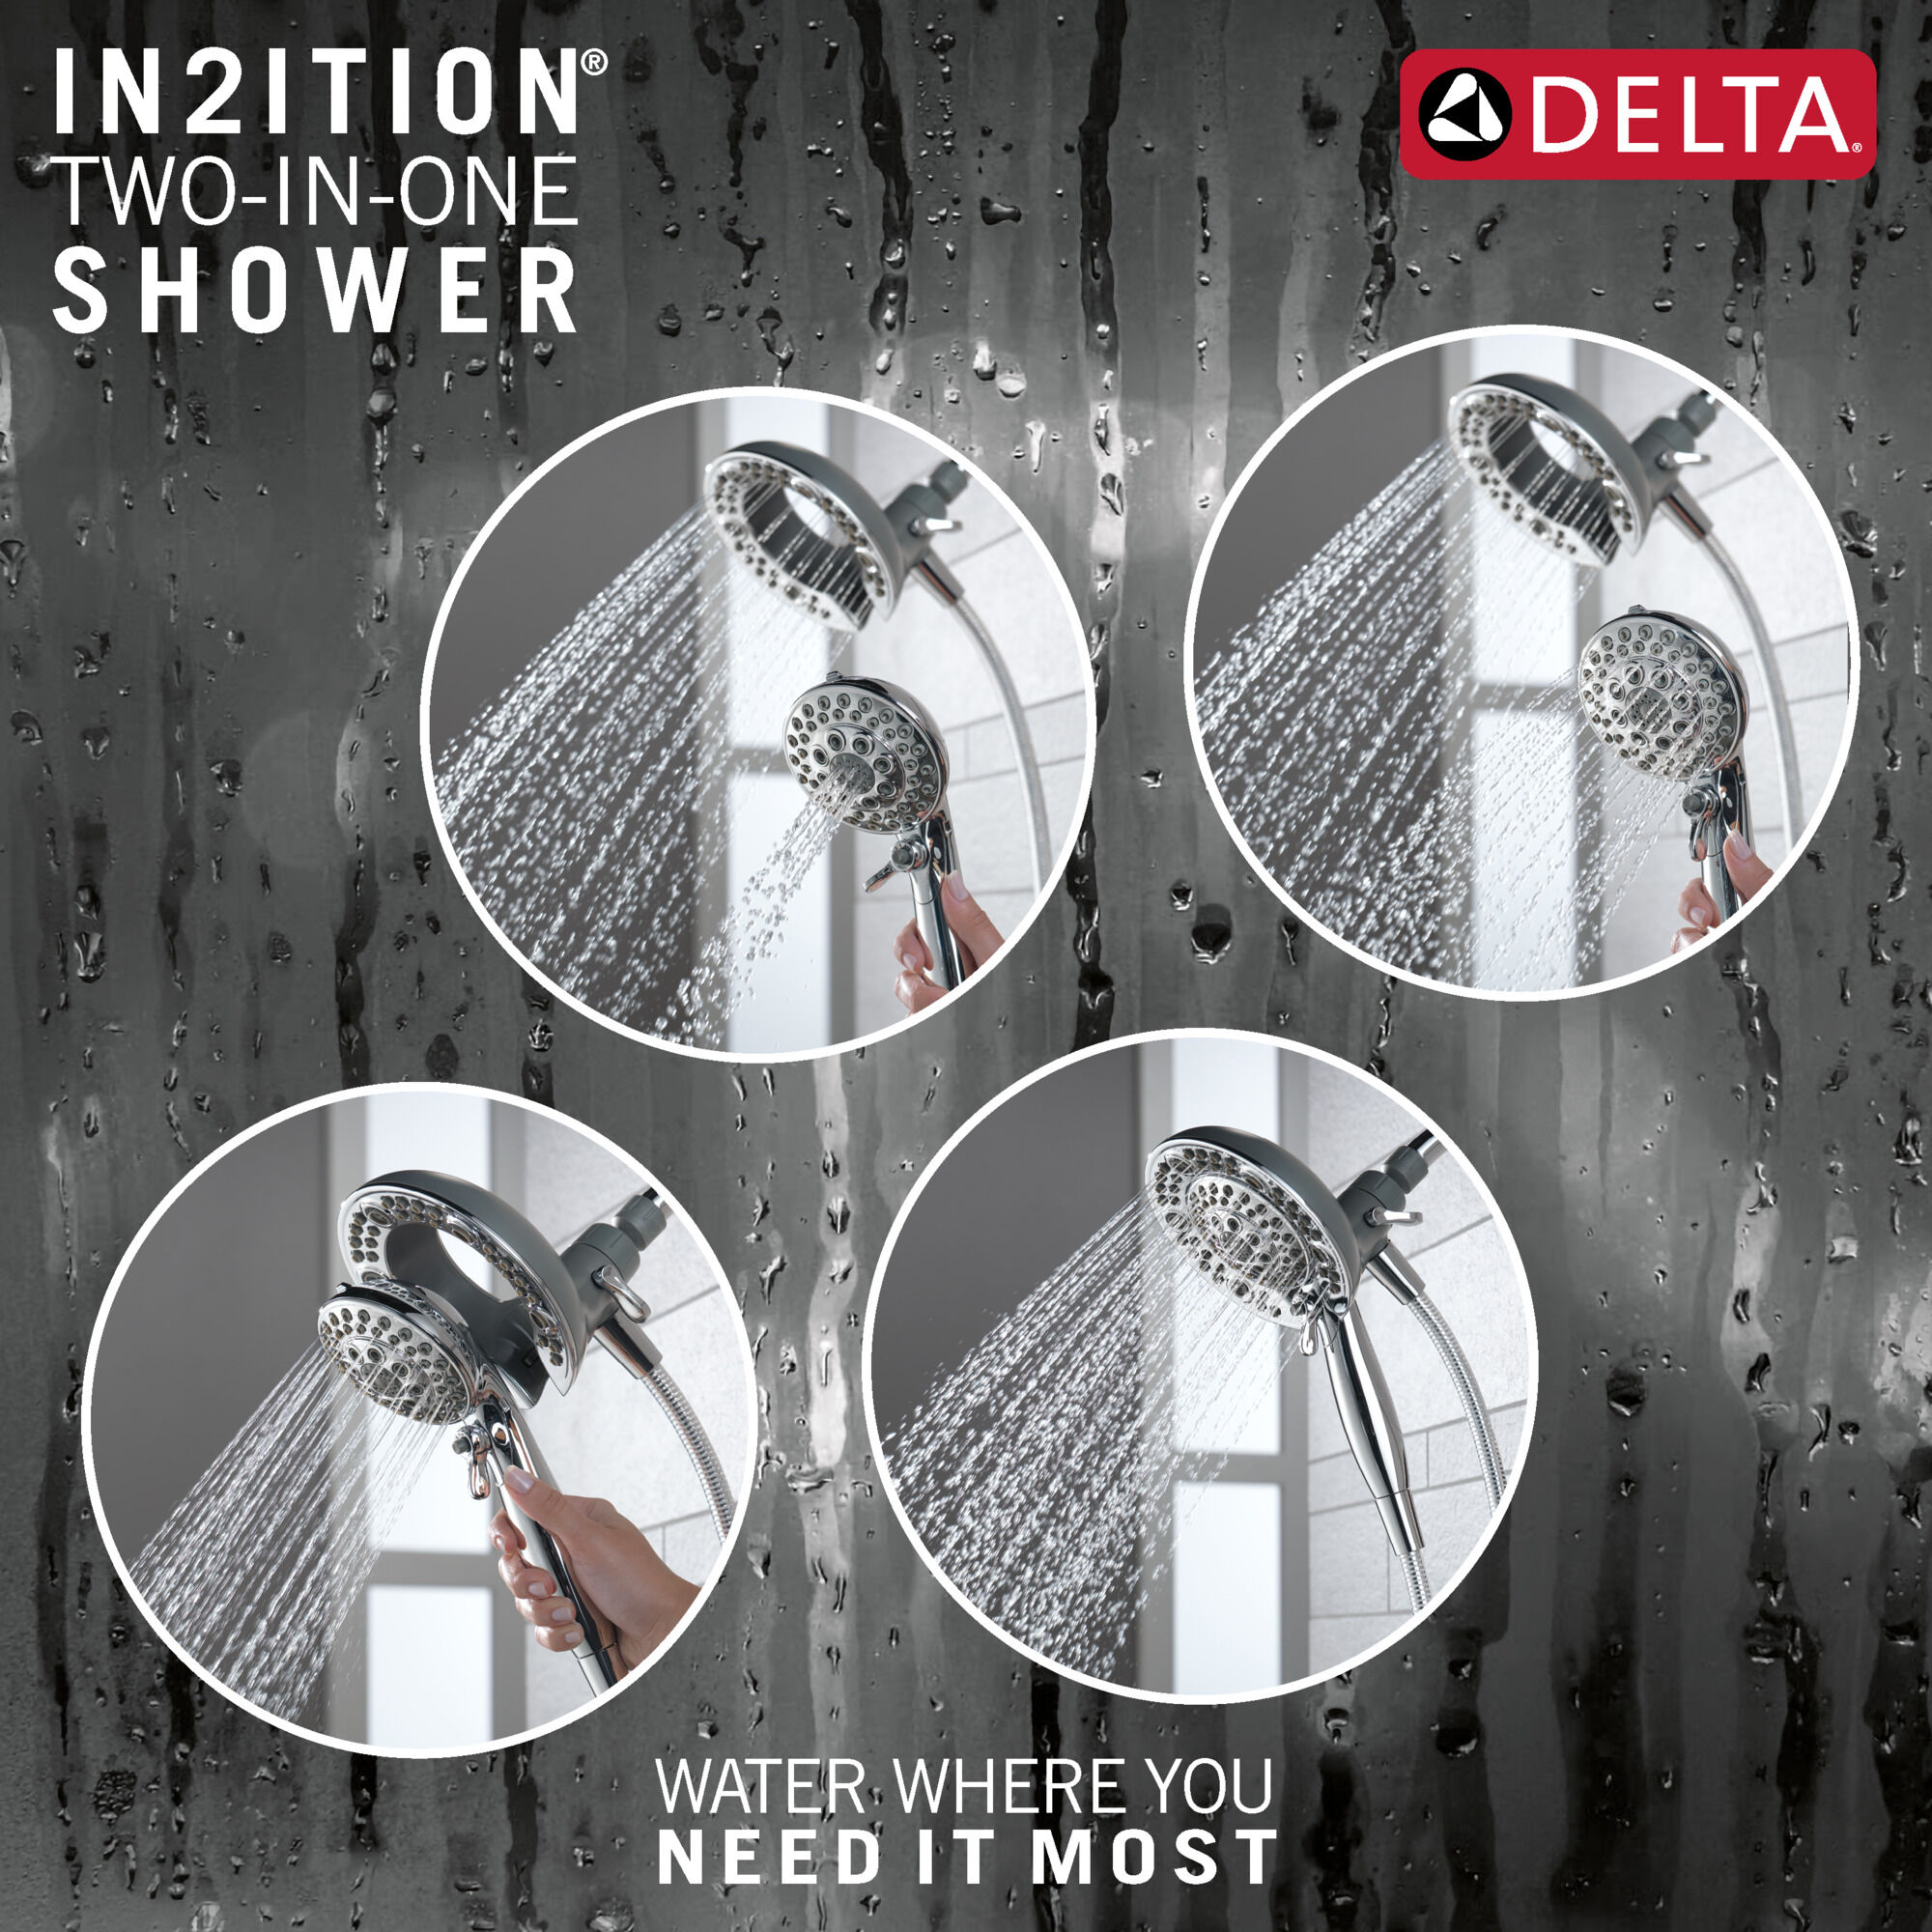 Satin Nickel) Delta Faucet 75588SN Universal Showering Components  5-Function In2ition Hand shower/Showerhead Combo, Satin Nickel 